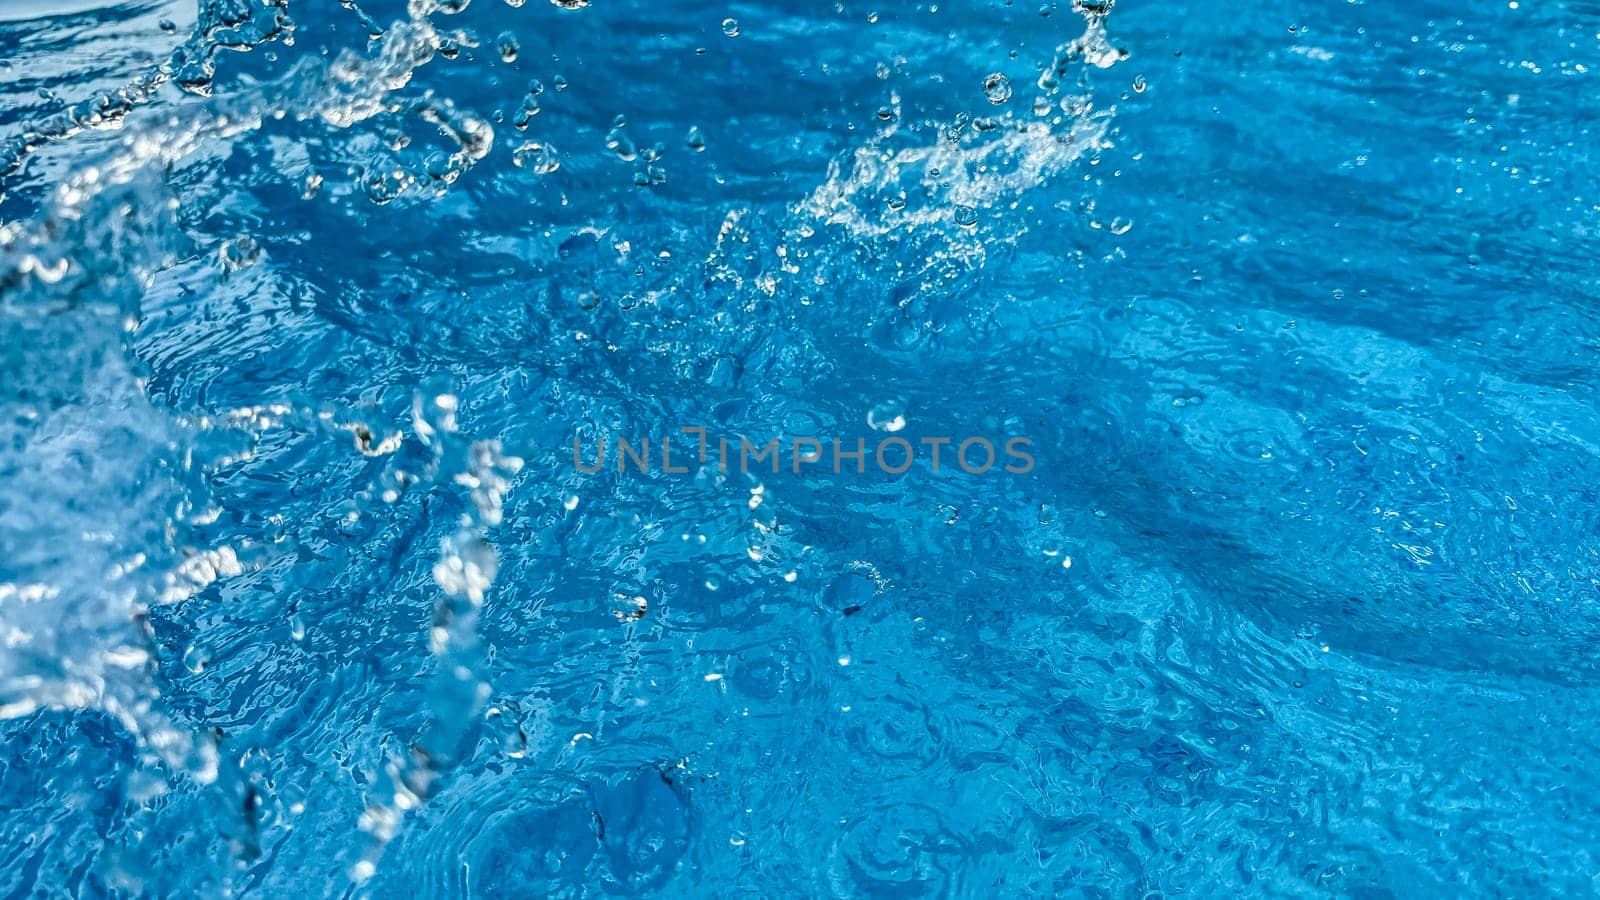 Background dynamic splash of clear water creating swirling wave in blue water with droplets suspended in motion. Clean water concept. High quality photo